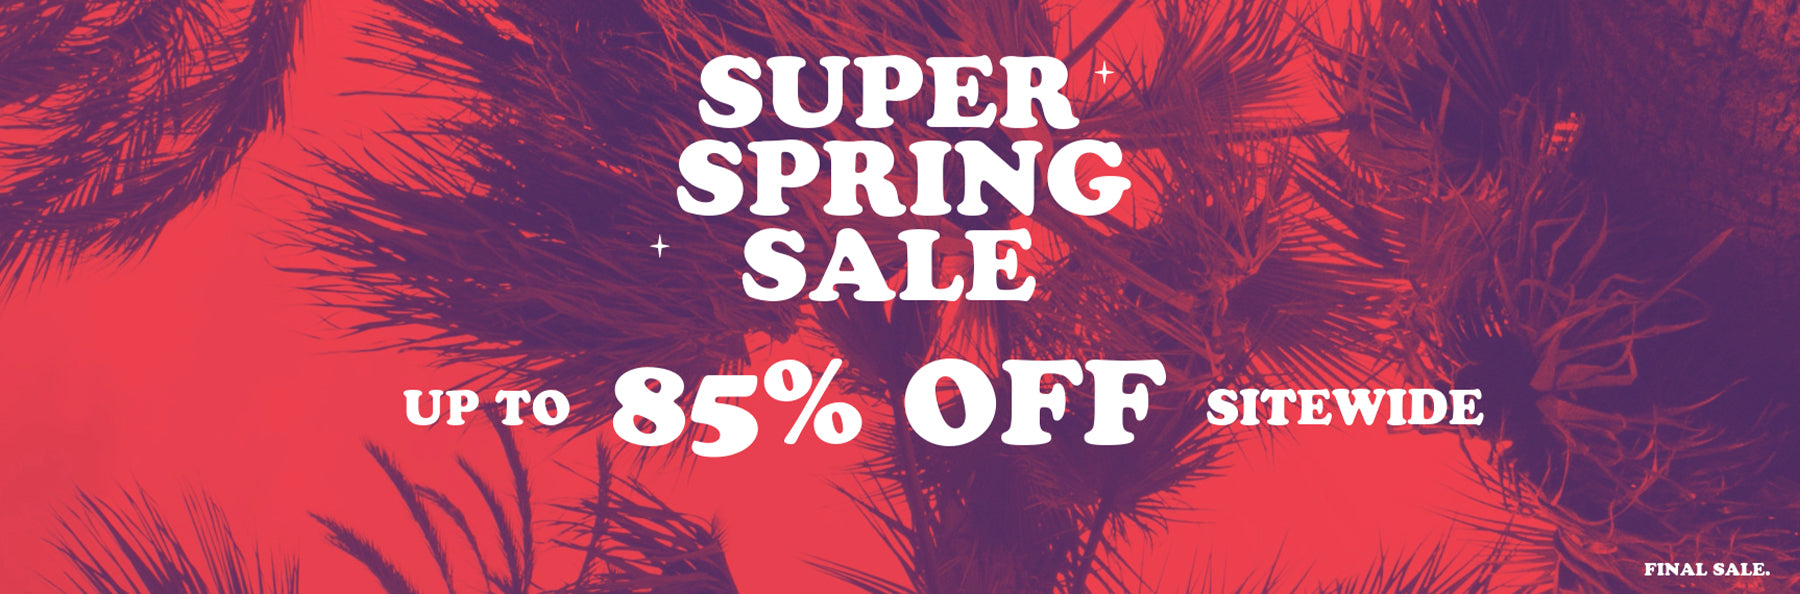 Super spring sales are on now. Up to 85% off sitewide on men's and women's styles. 